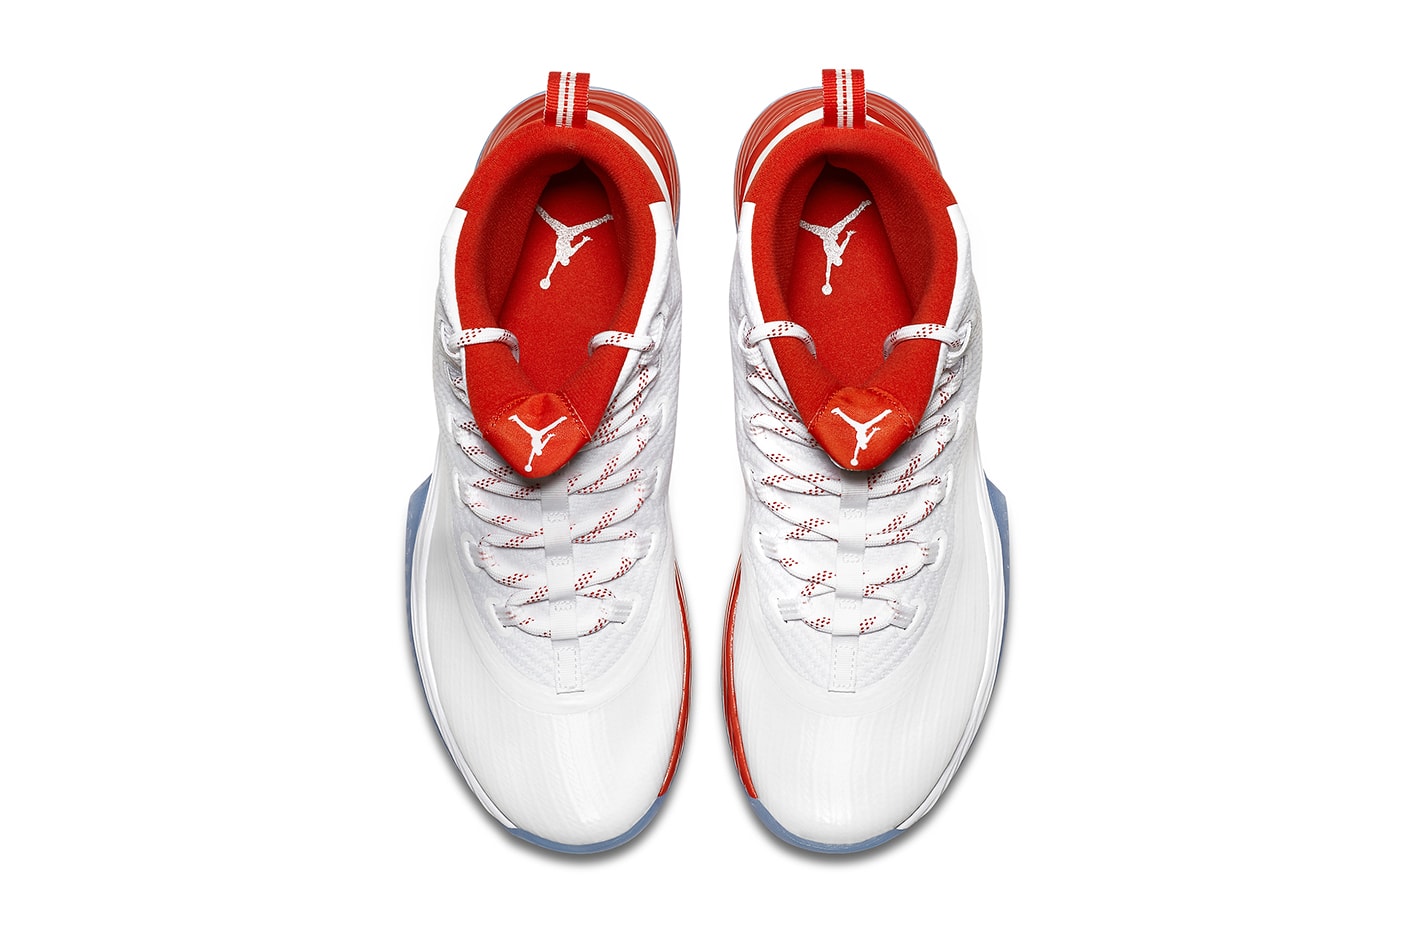 Air Jordan Ultra.Fly Ultra Fly 2 Red White Silver History of Flight Colorway